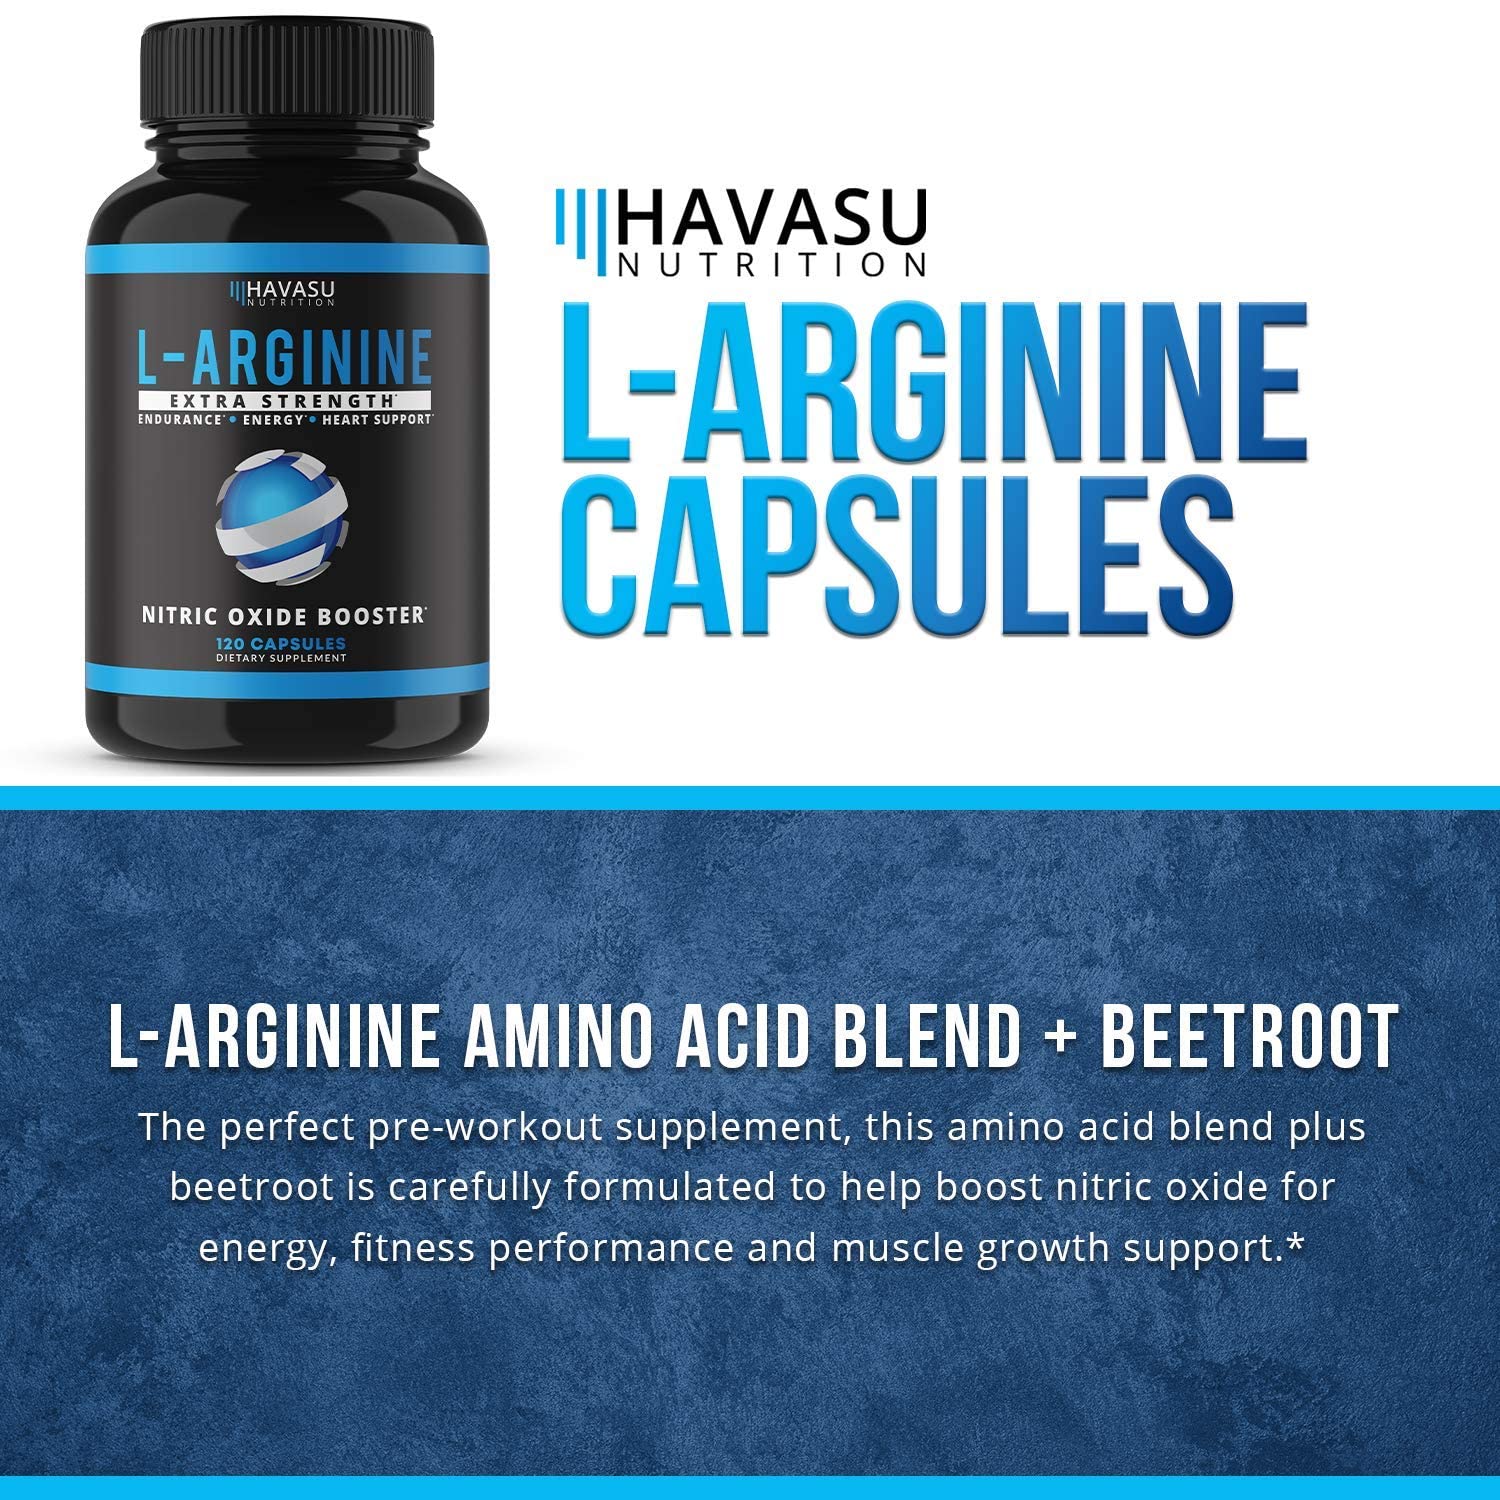 HAVASU NUTRITION L Arginine and Horny Goat Weed Bundle for Powerful Male Enhancing Supplement for Performance & Endurance Due to Increased Vascular Support